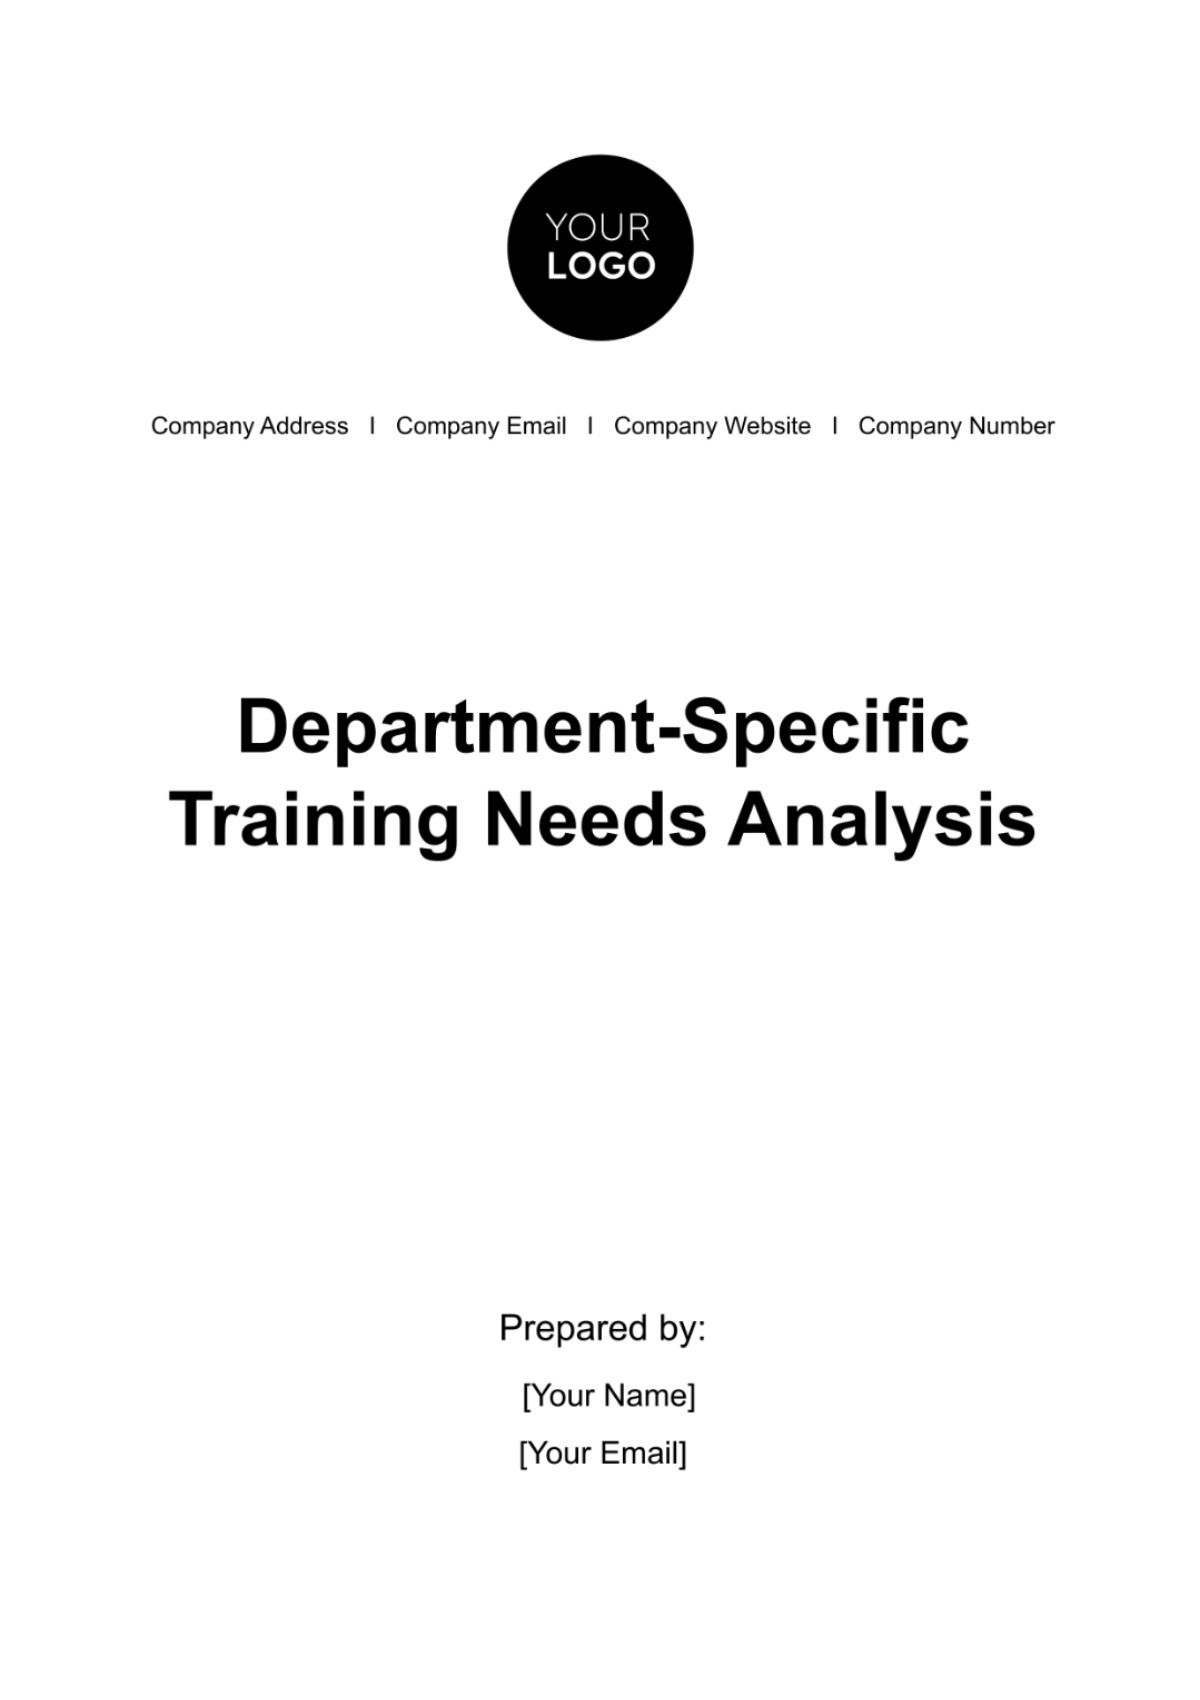 Department-specific Training Needs Analysis HR Template